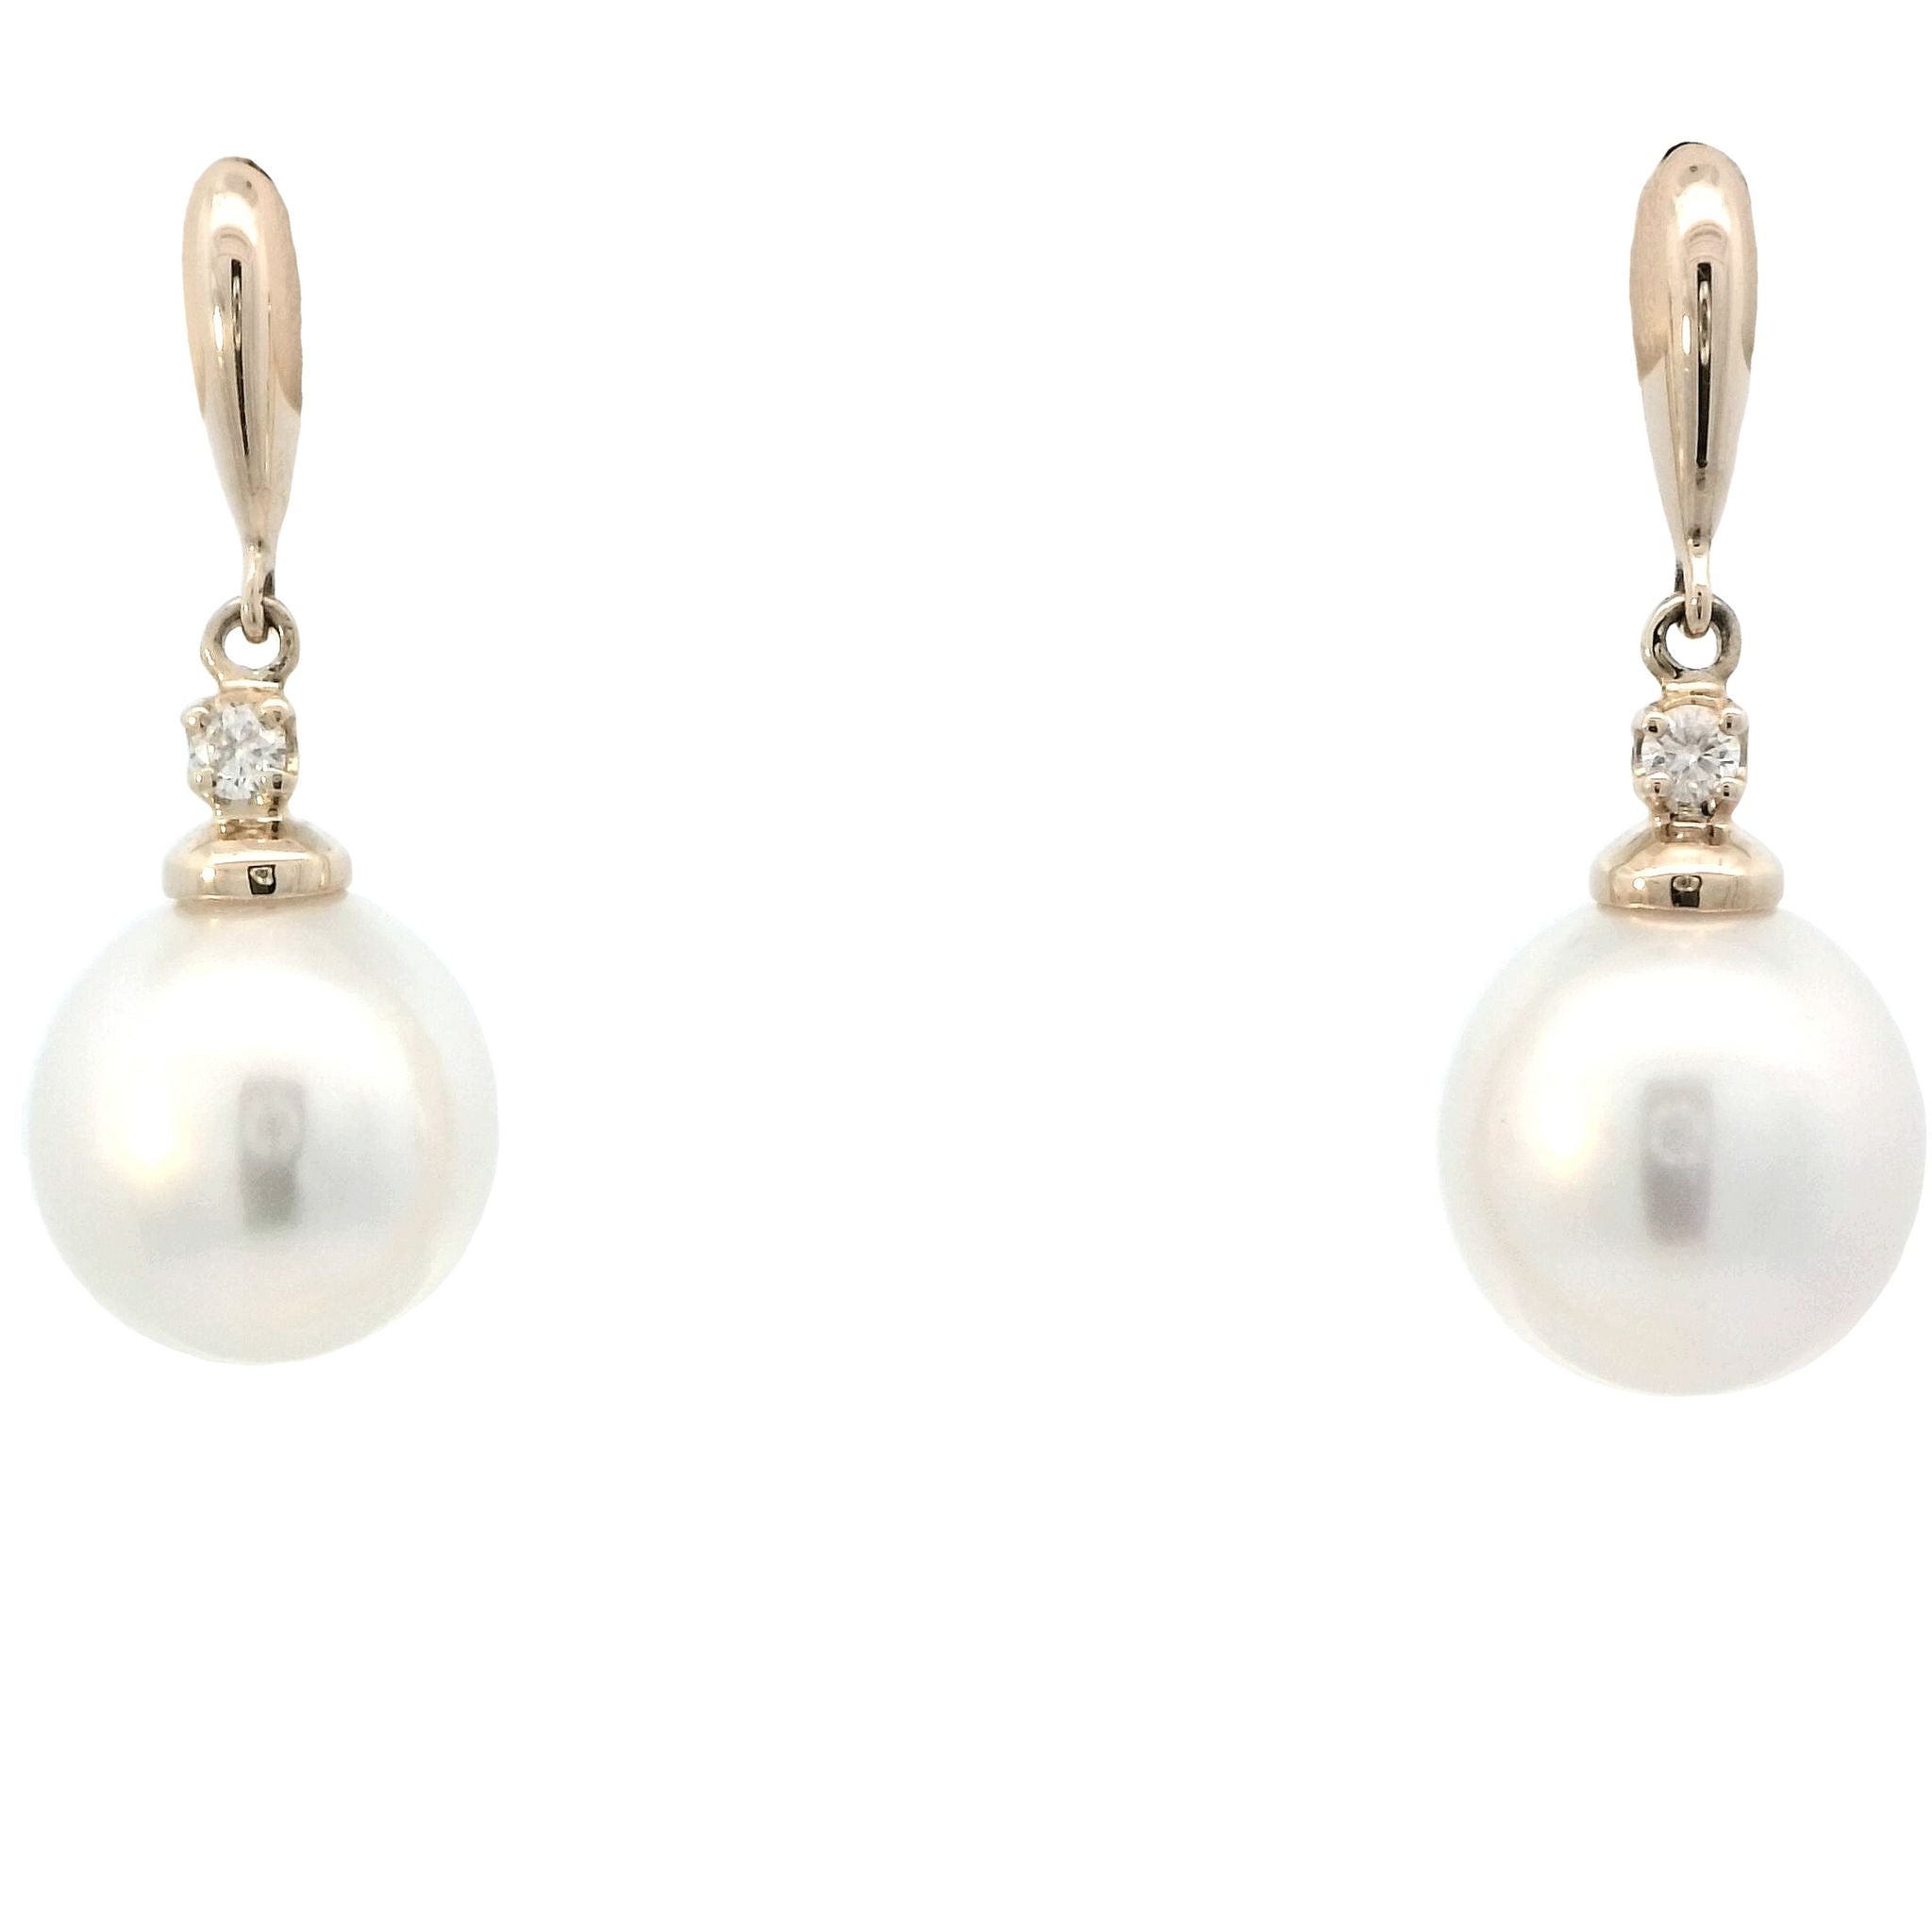 White South Sea Pearl Drop Earrings in Yellow Gold